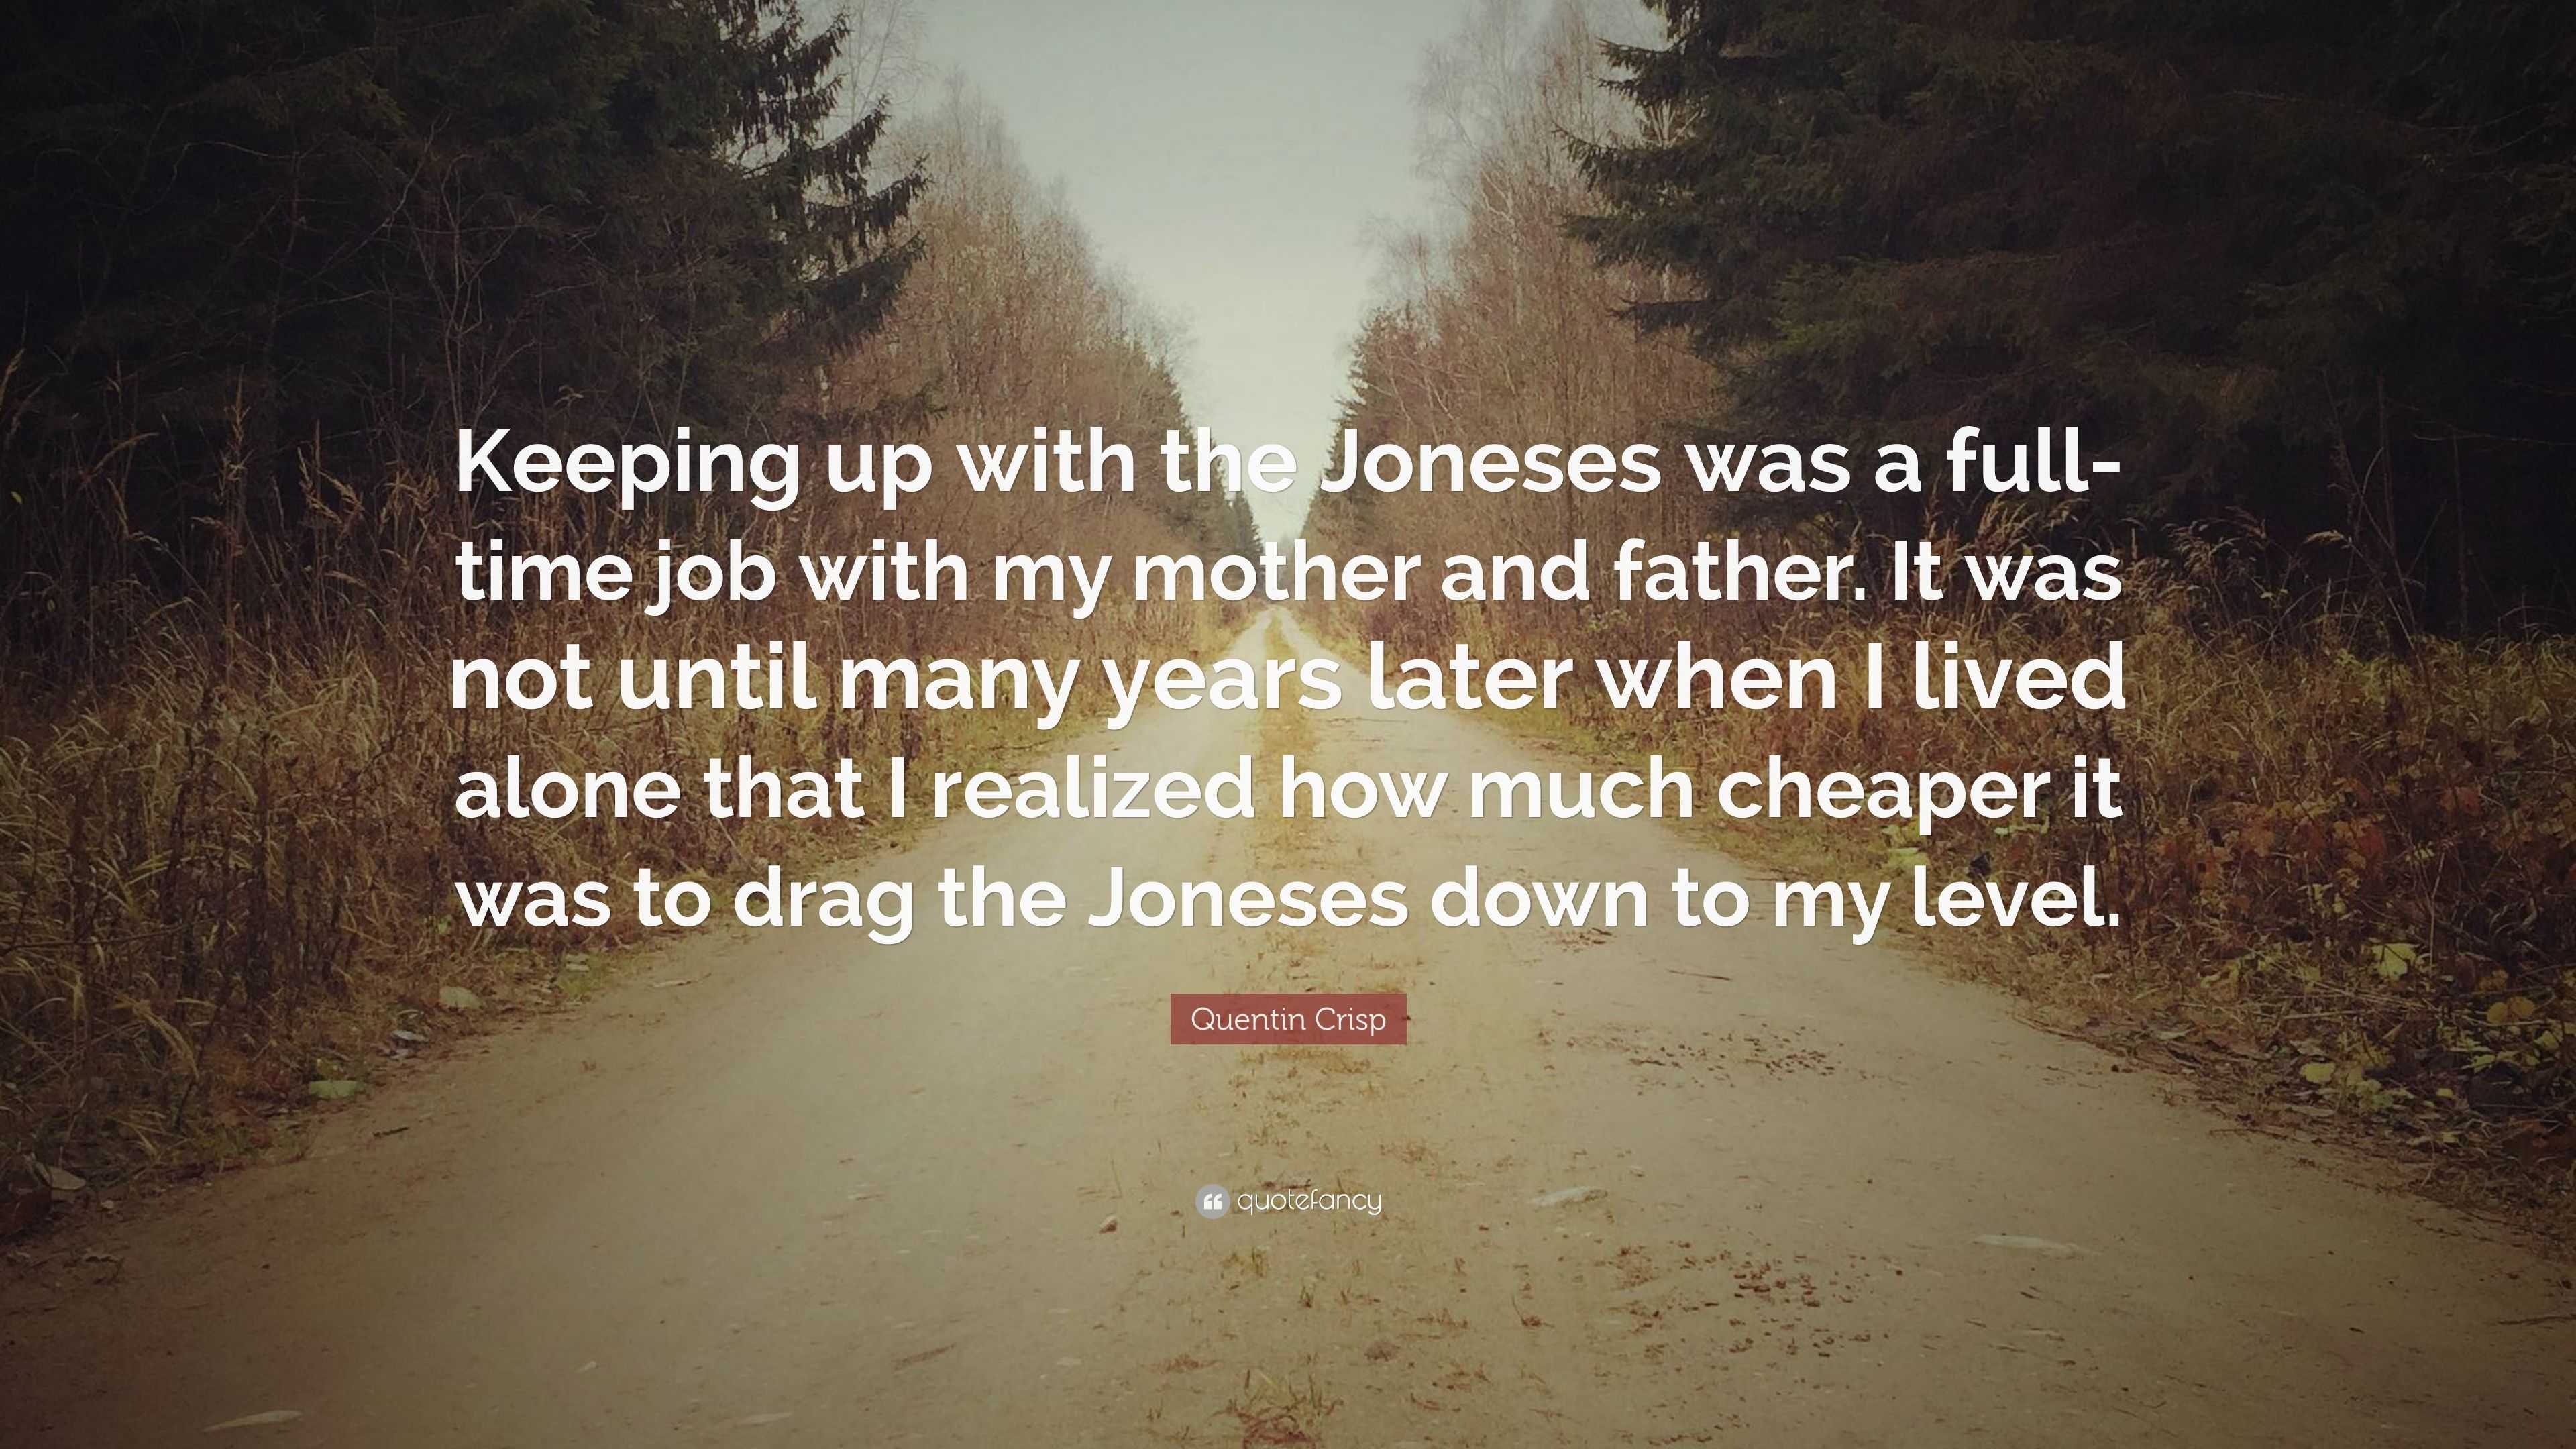 Quentin Crisp Quote: “Keeping up with the Joneses was a full-time job